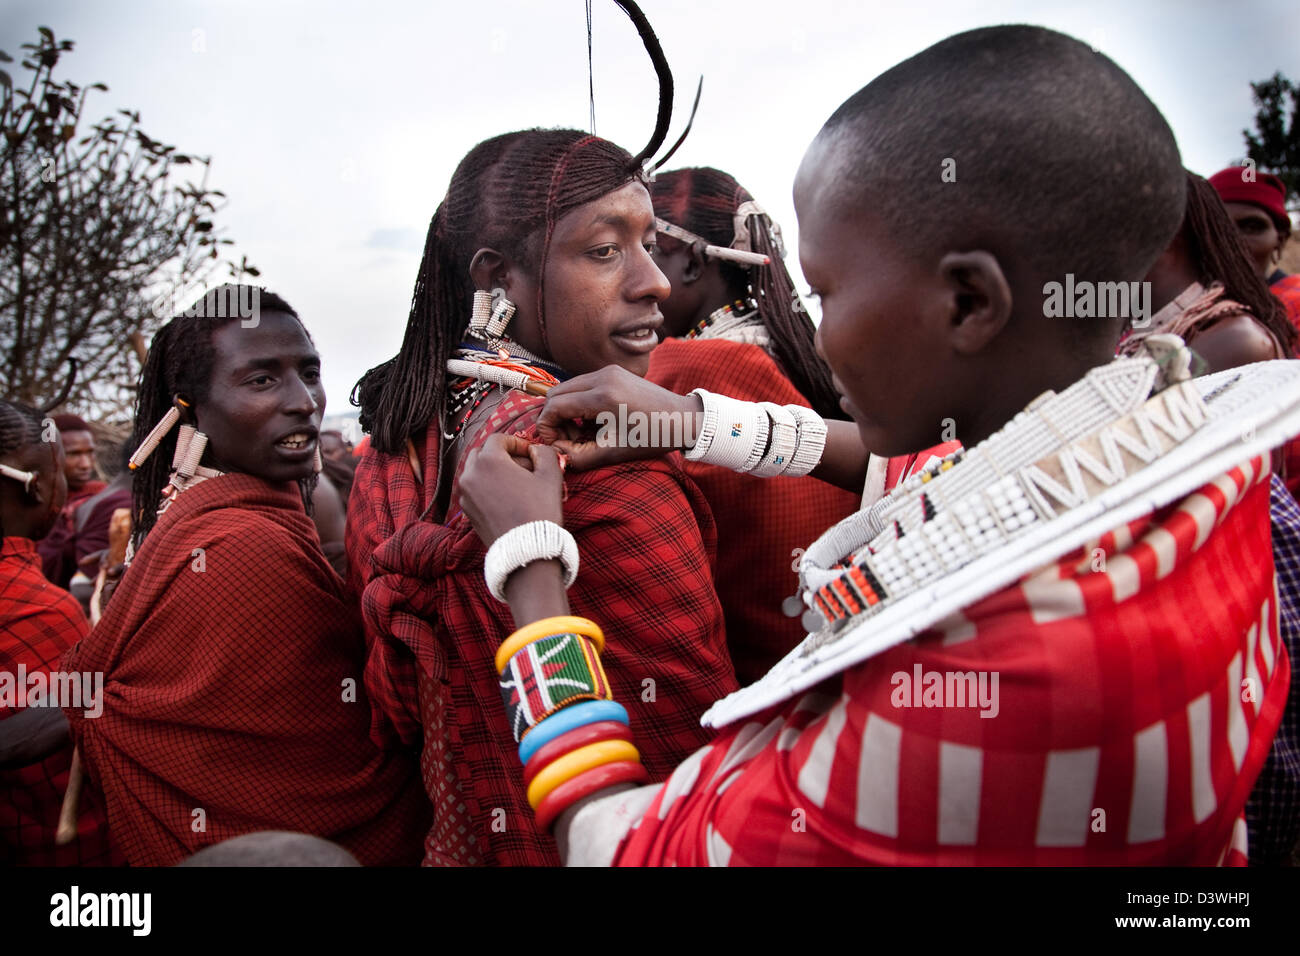 A young maasai woman fixes a young moran's clothings after they have come lose from too much dancing. Stock Photo